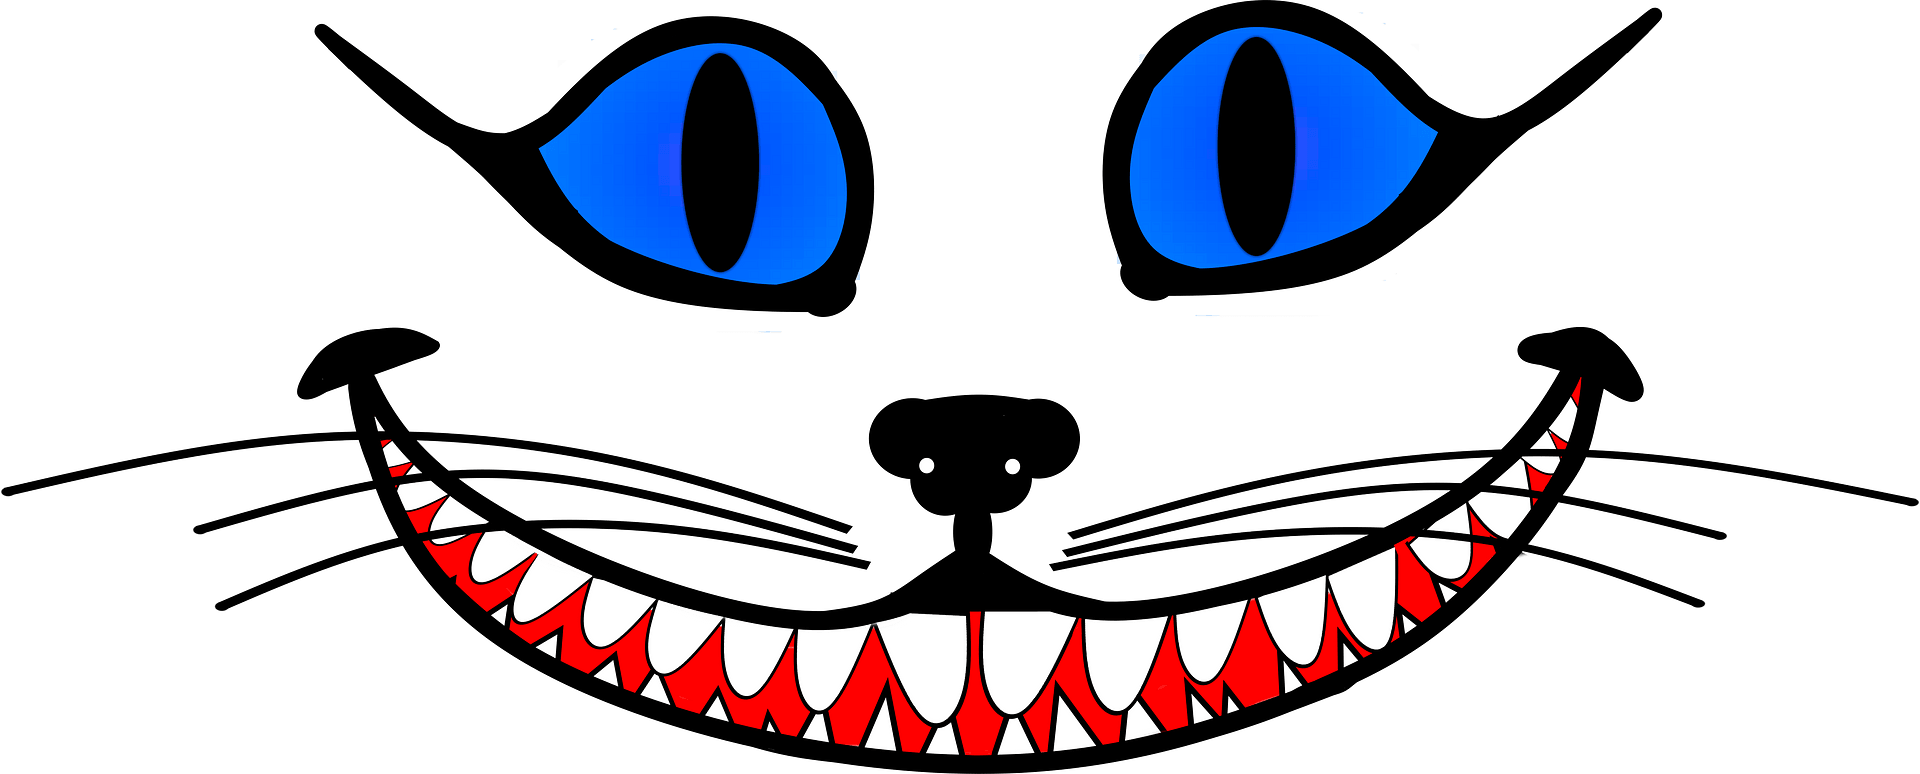 Free cheshire cat clipart download free cheshire cat clipart png images free cliparts on clipart library